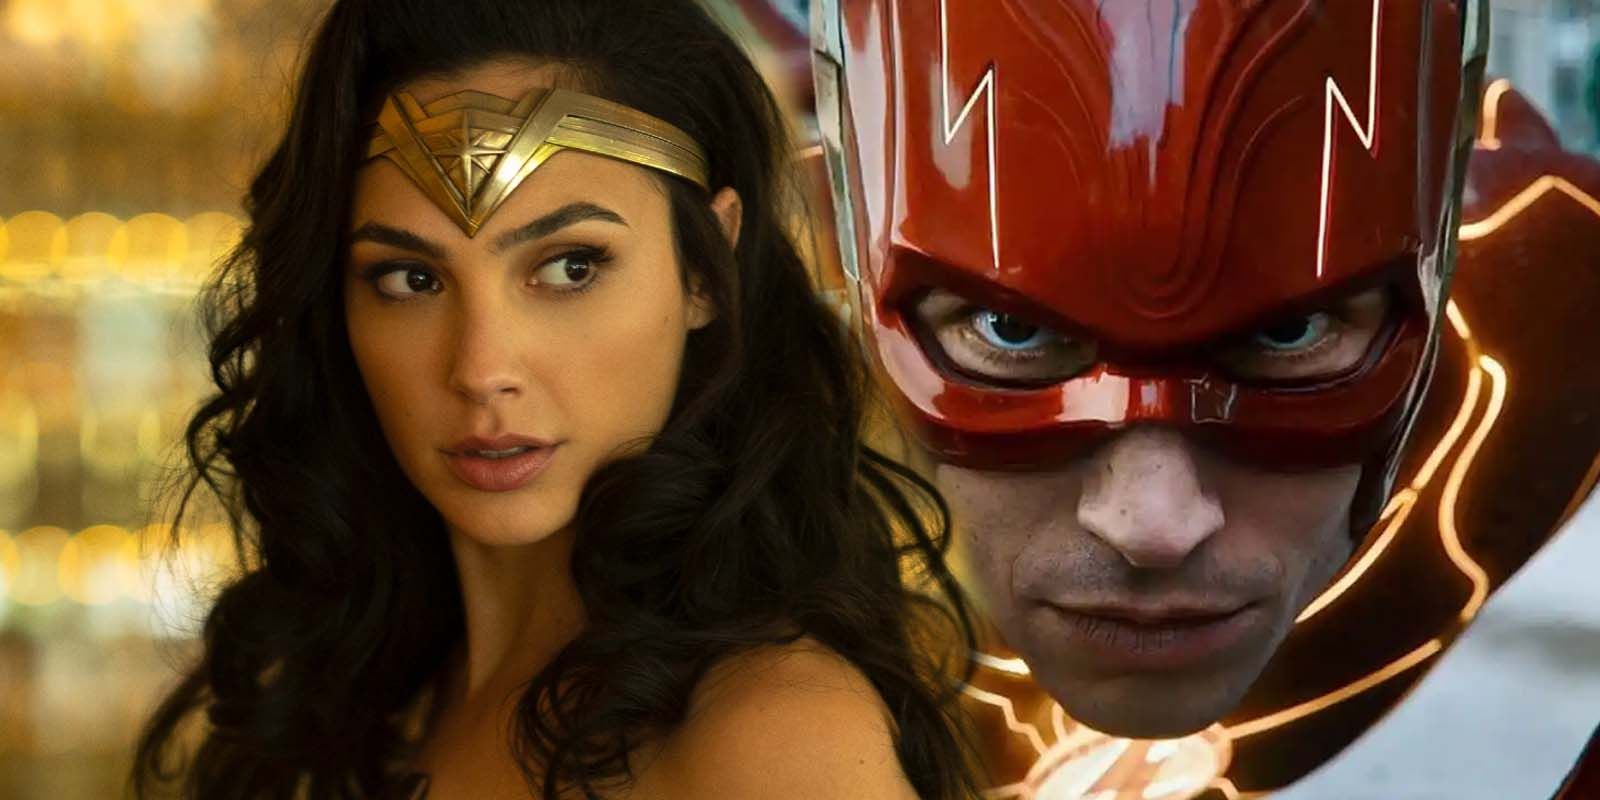 Spit image of Gal Gadot's Wonder Woman juxtaposed with Ezra Miller's The Flash